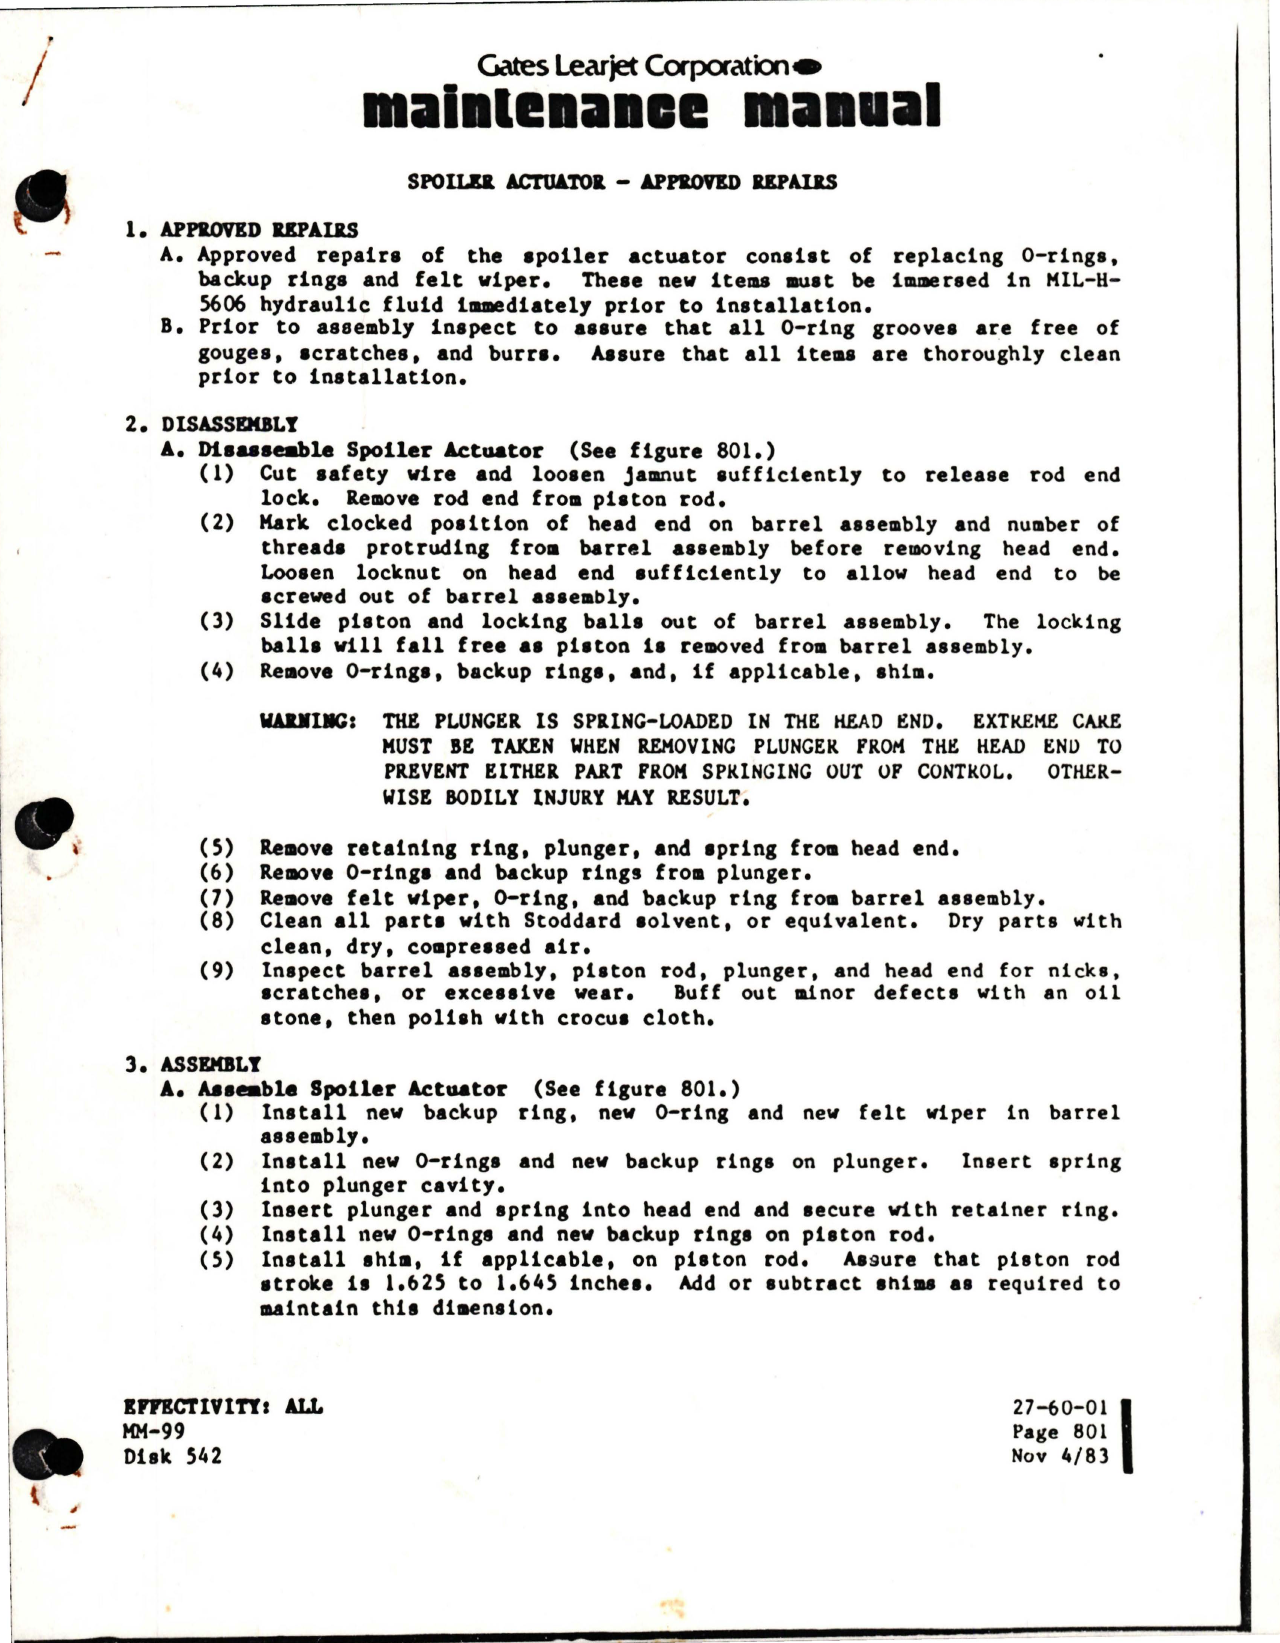 Sample page 1 from AirCorps Library document: Maintenance Manual for Spoiler Actuator - Approved Repairs